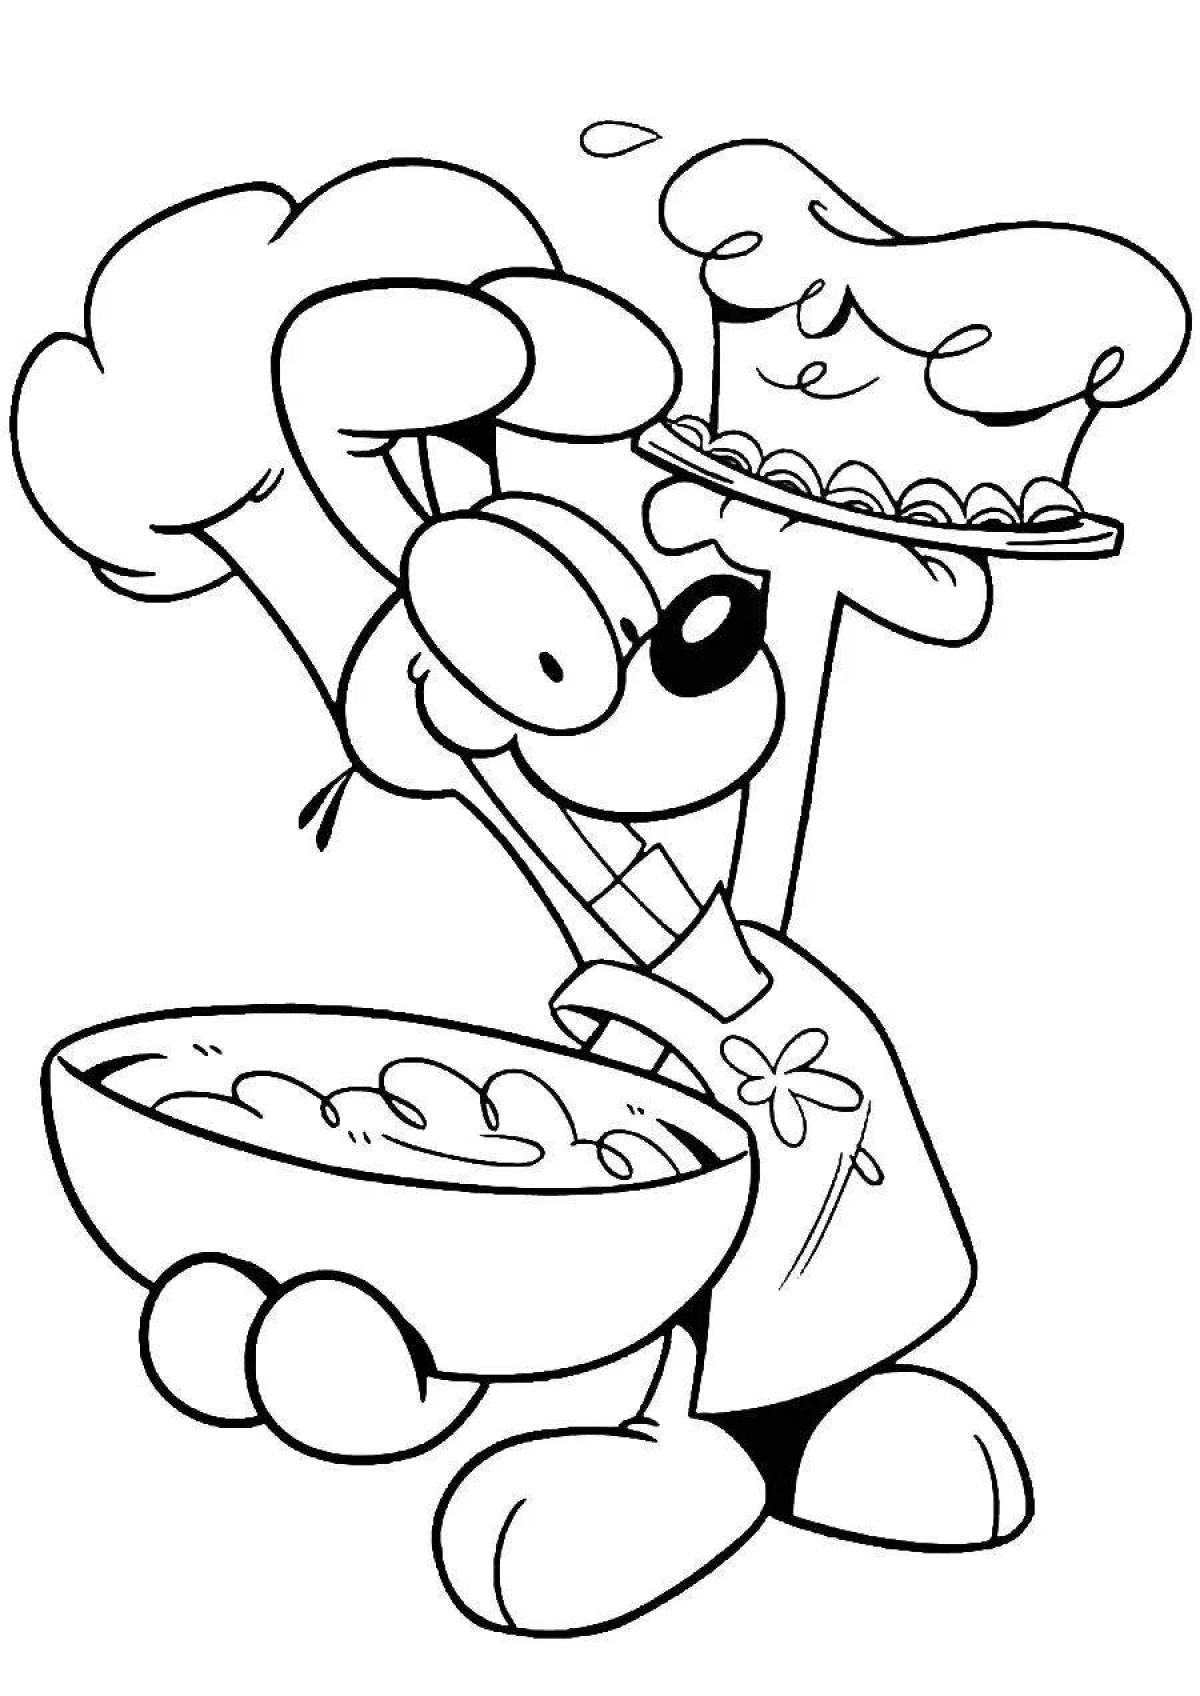 Color-bright cook coloring page